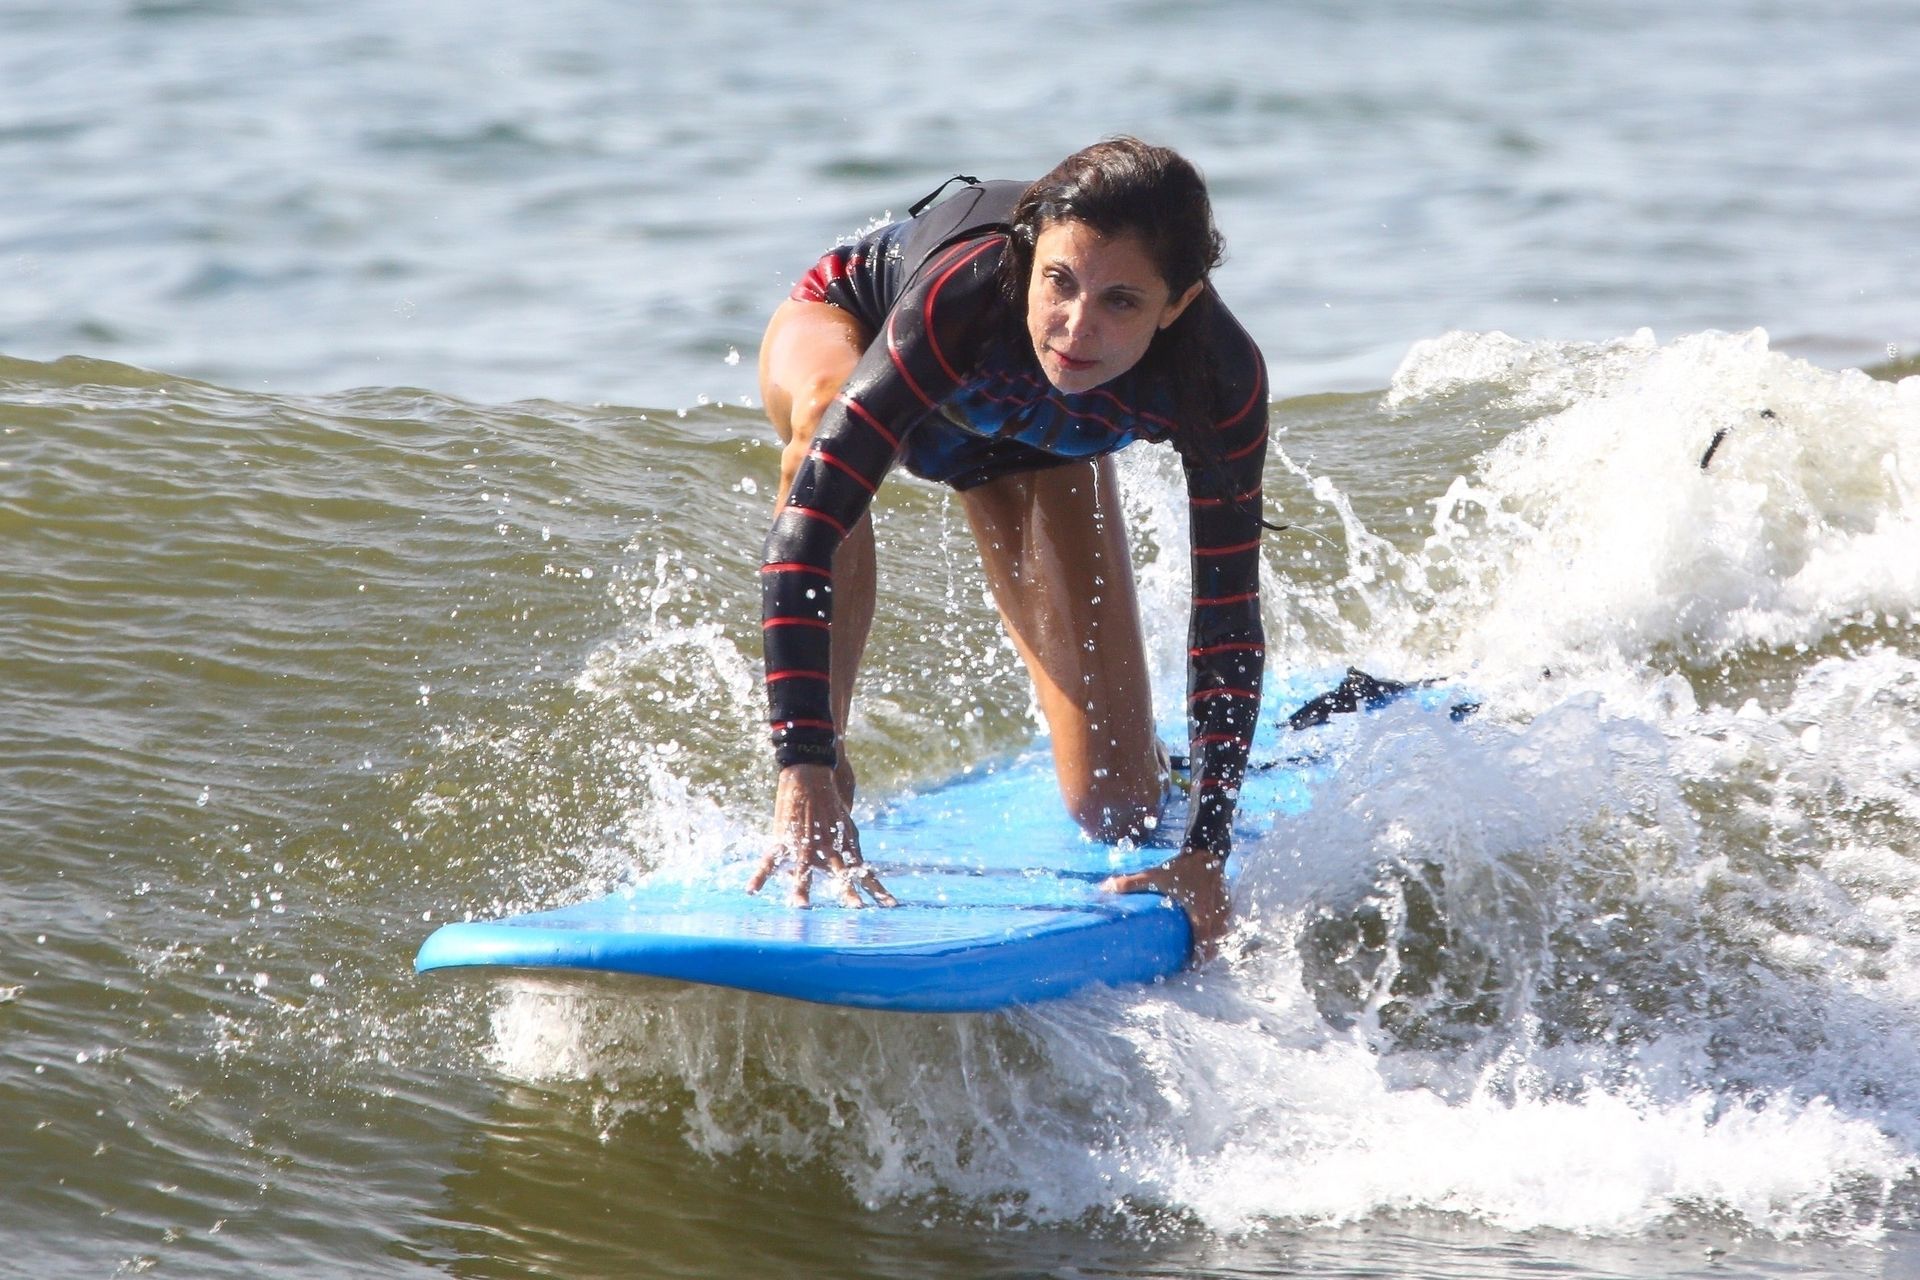 Surfs Up! Bethenny Frankel Hits the Waves in The Hamptons (66 Photos)